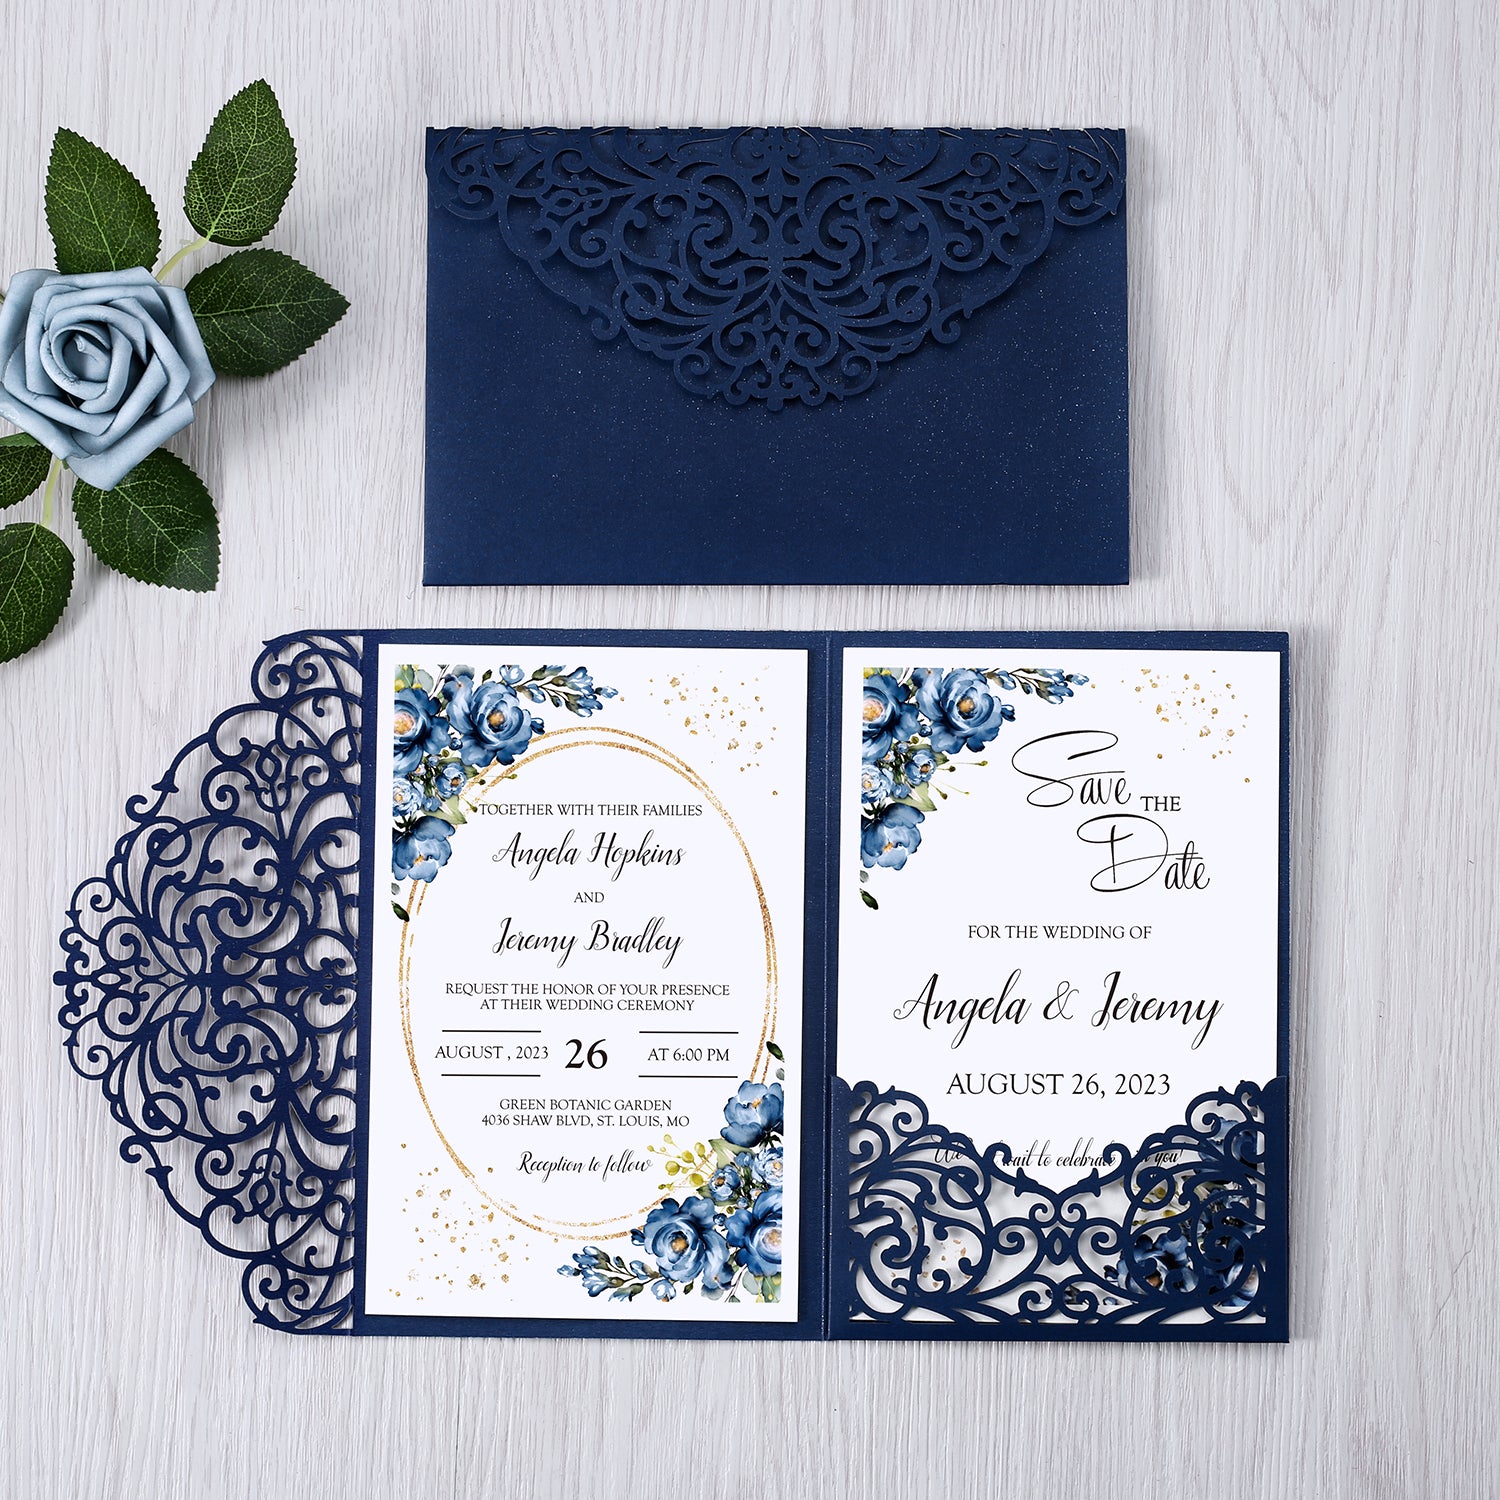 4.7 x7 inch Blue Laser Cut Hollow Rose Wedding Invitations Cards with Envelopes for Wedding Party - DorisHome